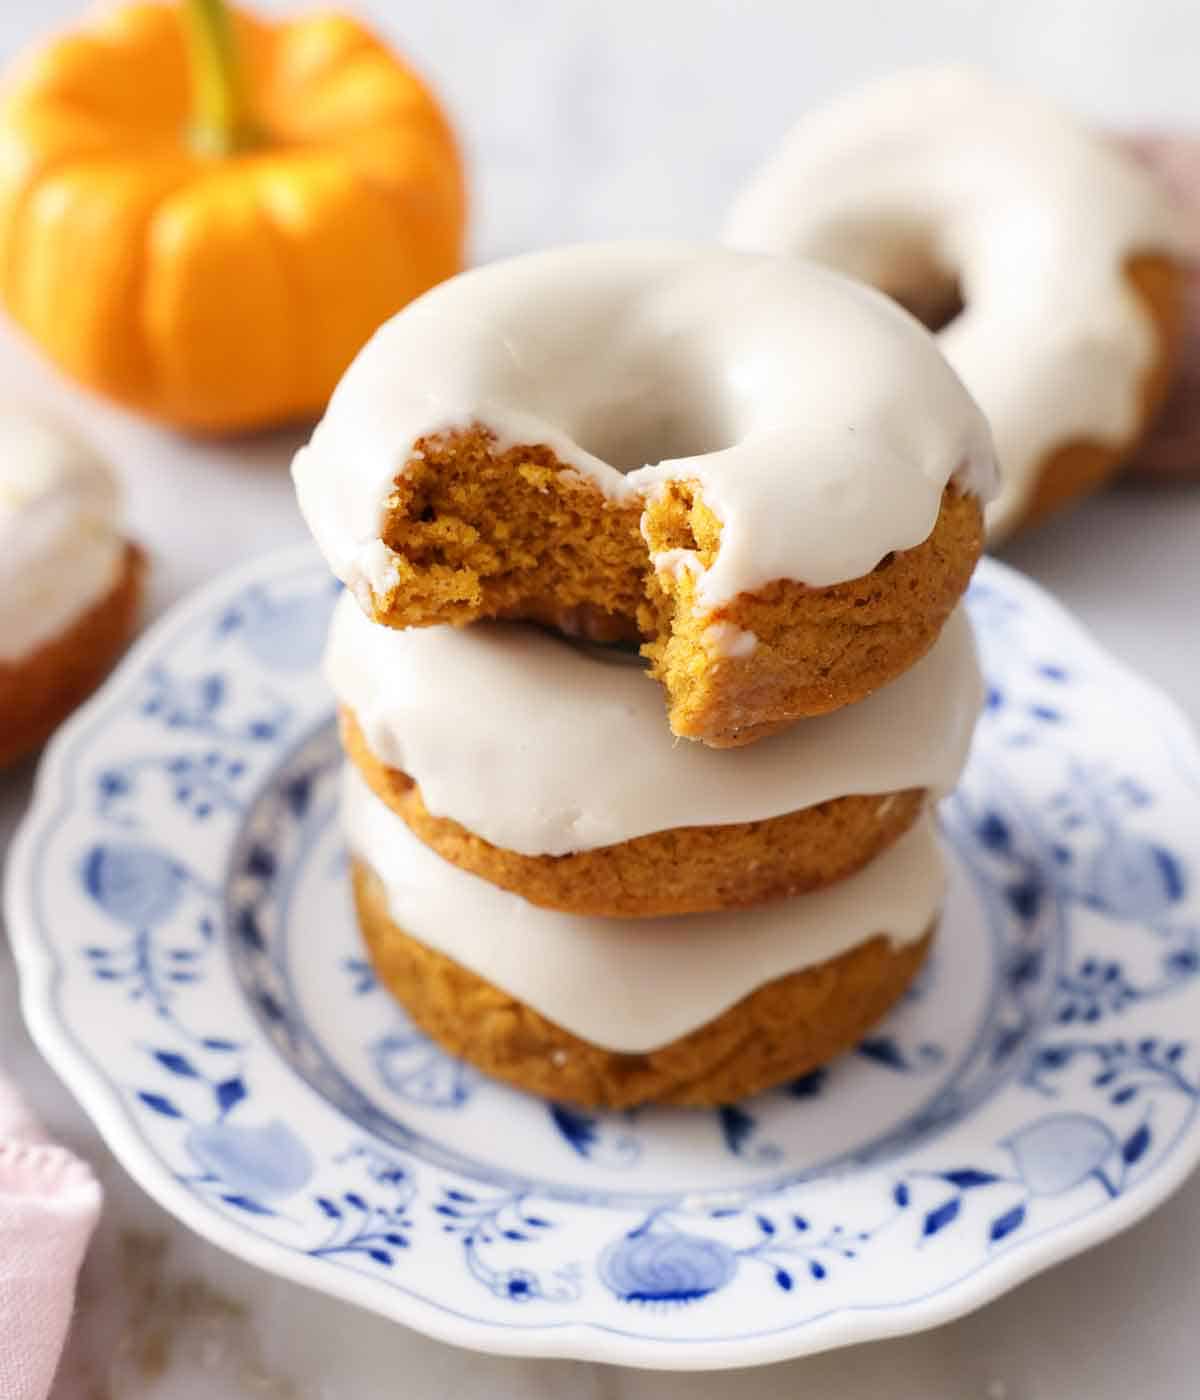 A stack of three pumpkin donuts with a bite taken out of the top donut.